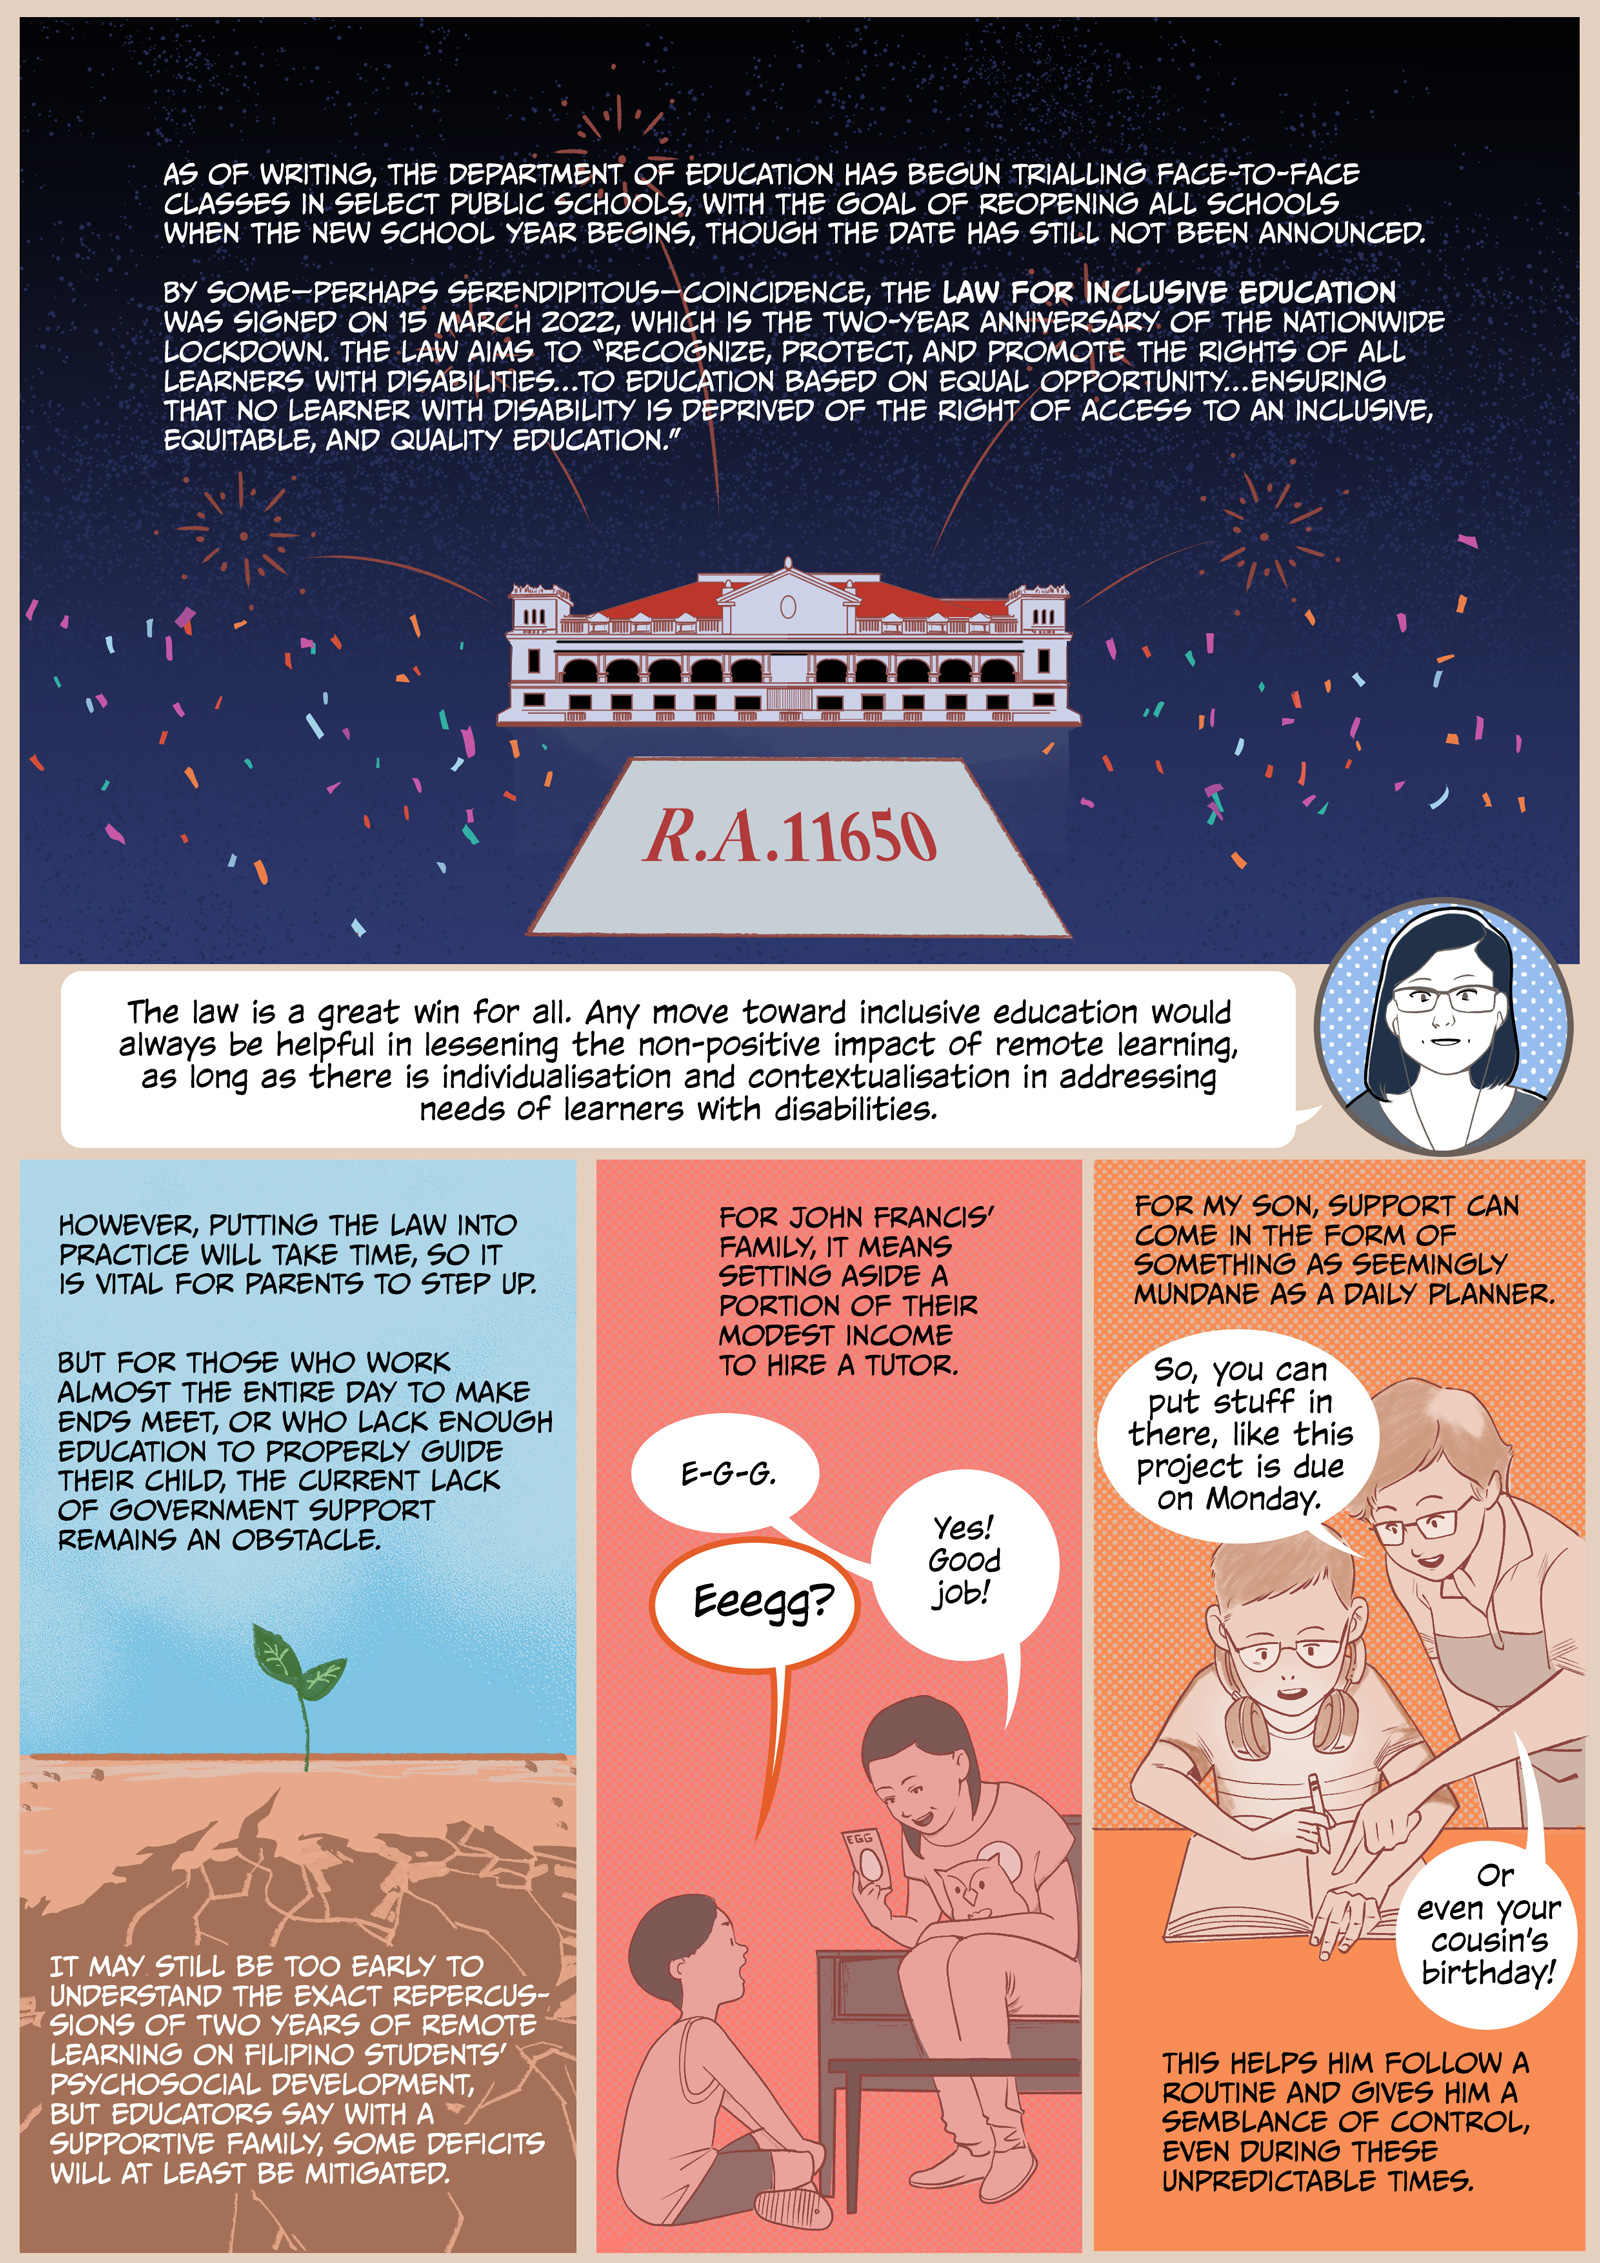 Page 6. A comic page of five panels in various shades of reddish-orange, blue, and green.
Panel 1. An image of a government building, with a carpet before it that says ‘R.A. 11650’. In the dark blue background, fireworks and confetti explode. Narrator: ‘As of writing, the Department of Education has begun trialling face-to-face classes in select public schools, with the goal of reopening all schools when the new school year begins, though the date has still not been announced. 
By some—perhaps serendipitous— coincidence, the Law for Inclusive Education was signed on 15 March 2022, which is the two-year anniversary of the nationwide lockdown. The law aims to “recognize, protect, and promote the rights of all learners with disabilities…to education based on equal opportunity…ensuring that no learner with disability is deprived of the right of access to an inclusive, equitable, and quality education.”’
Panel 2. Professor Vidal: “The law is a great win for all. Any move toward inclusive education would always be helpful in lessening the non-positive impact of remote learning, as long as there is individualisation and contextualisation in addressing needs of learners with disabilities.”
Panel 3. A green sapling grows from cracked and parched brown earth. Narrator: “However, putting the law into practice will take time, so it is vital for parents to step up. But for those who work almost the entire day to make ends meet, or who lack enough education to properly guide their child, the current lack of government support remains an obstacle. It may still be too early to understand the exact repercussions of two years of remote learning on Filipino students’ psychosocial development, but educators say with a supportive family, some deficits will at least be mitigated.”
Panel 4. A woman sits on a couch, holding flashcards and a soft toy. Before her, John Francis sits on the floor, attentive. Narrator: “For John Francis’ family, it means setting aside a portion of their modest income to hire a tutor.” Tutor: “E-G-G.” John Francis: “Eeegg?” Tutor: “Yes! Good job!”
Panel 5: Narrator: “For my son, support can come in the form of something as seemingly mundane as a daily planner.” She stands beside her son, who is seated at a table and writing in a planner. Mother: “So, you can put stuff in there, like this project is due on Monday. Or even your cousin’s birthday!”. Narrator: “This helps him follow a routine and gives him a semblance of control, even during these unpredictable times.”
END SCRIPT.